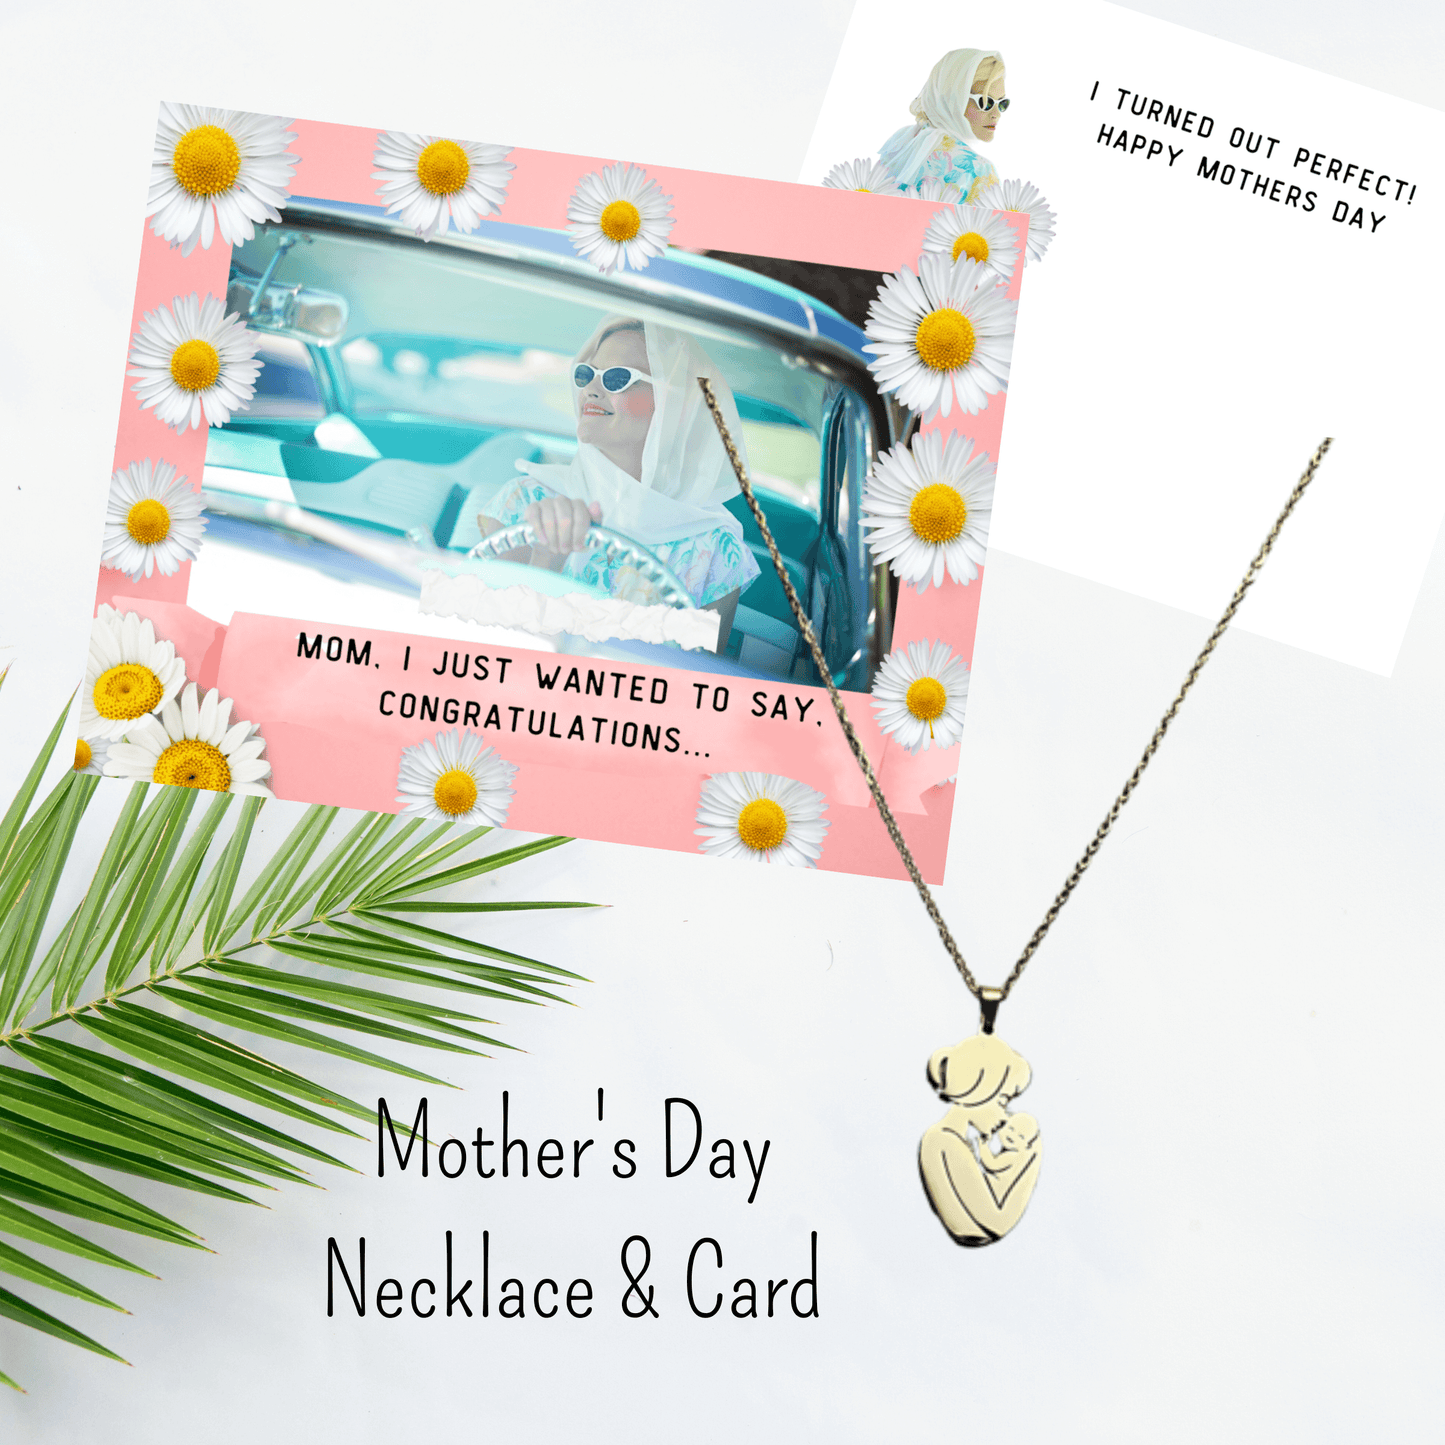 Mothers Day Gift:  Gold Stainless Steel Necklace w Chain & Card - Free Shipping